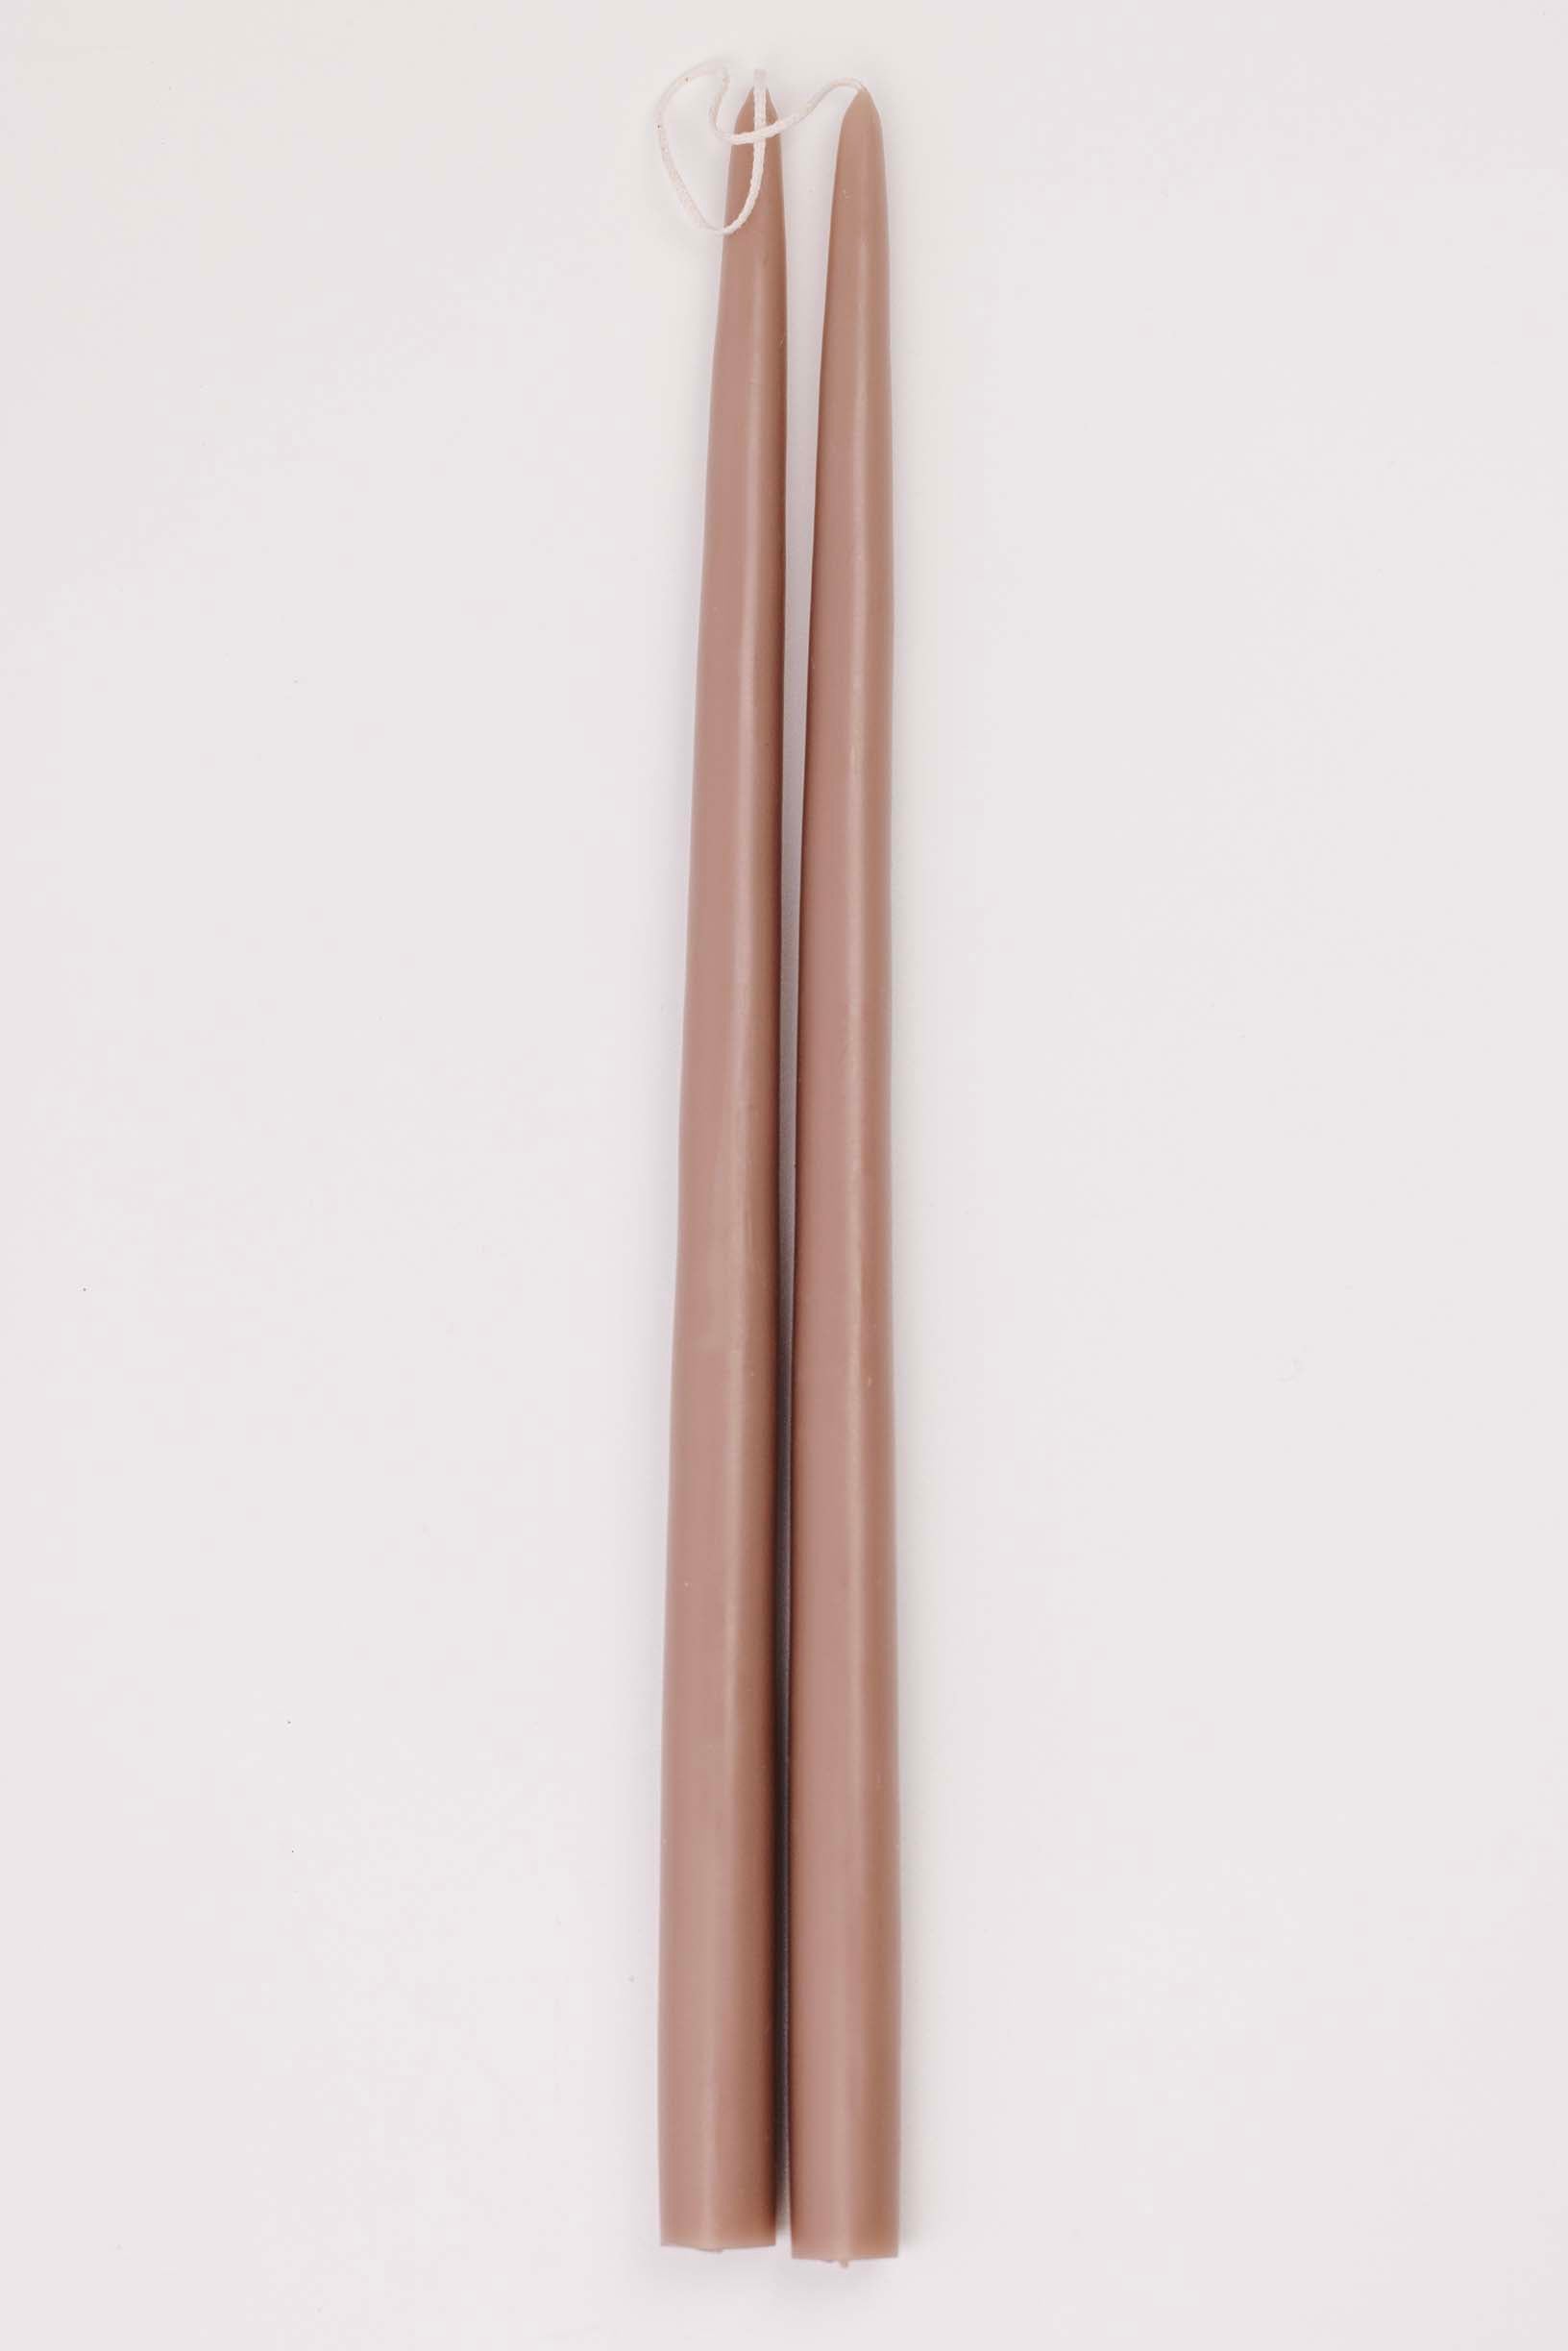 Greige Taper Candles - 2 Sizes